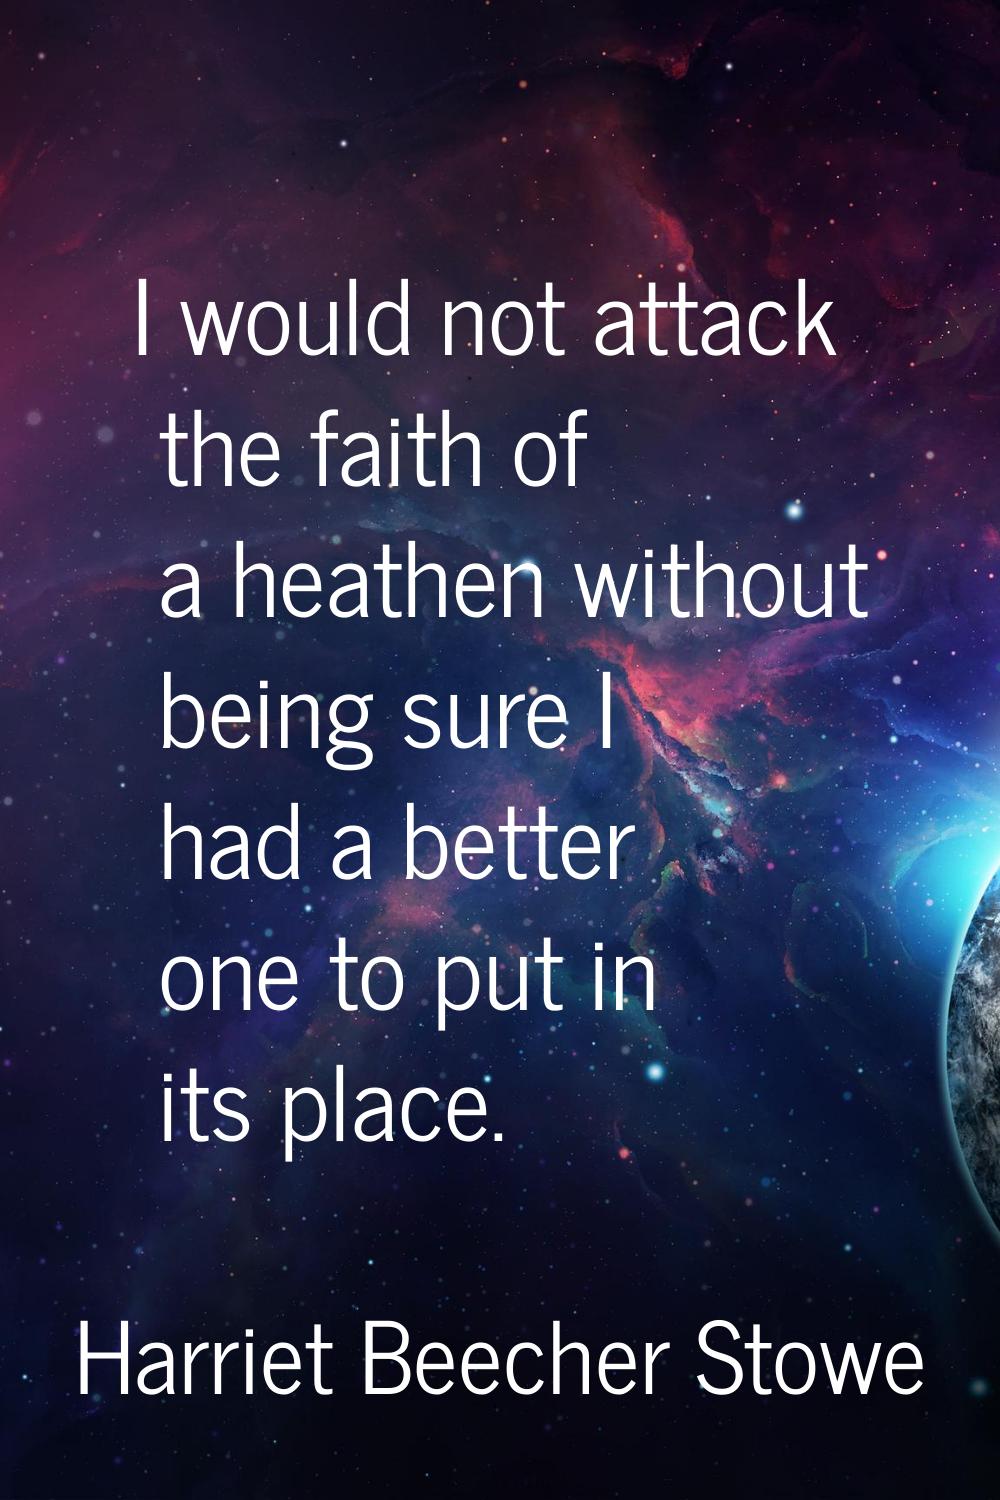 I would not attack the faith of a heathen without being sure I had a better one to put in its place